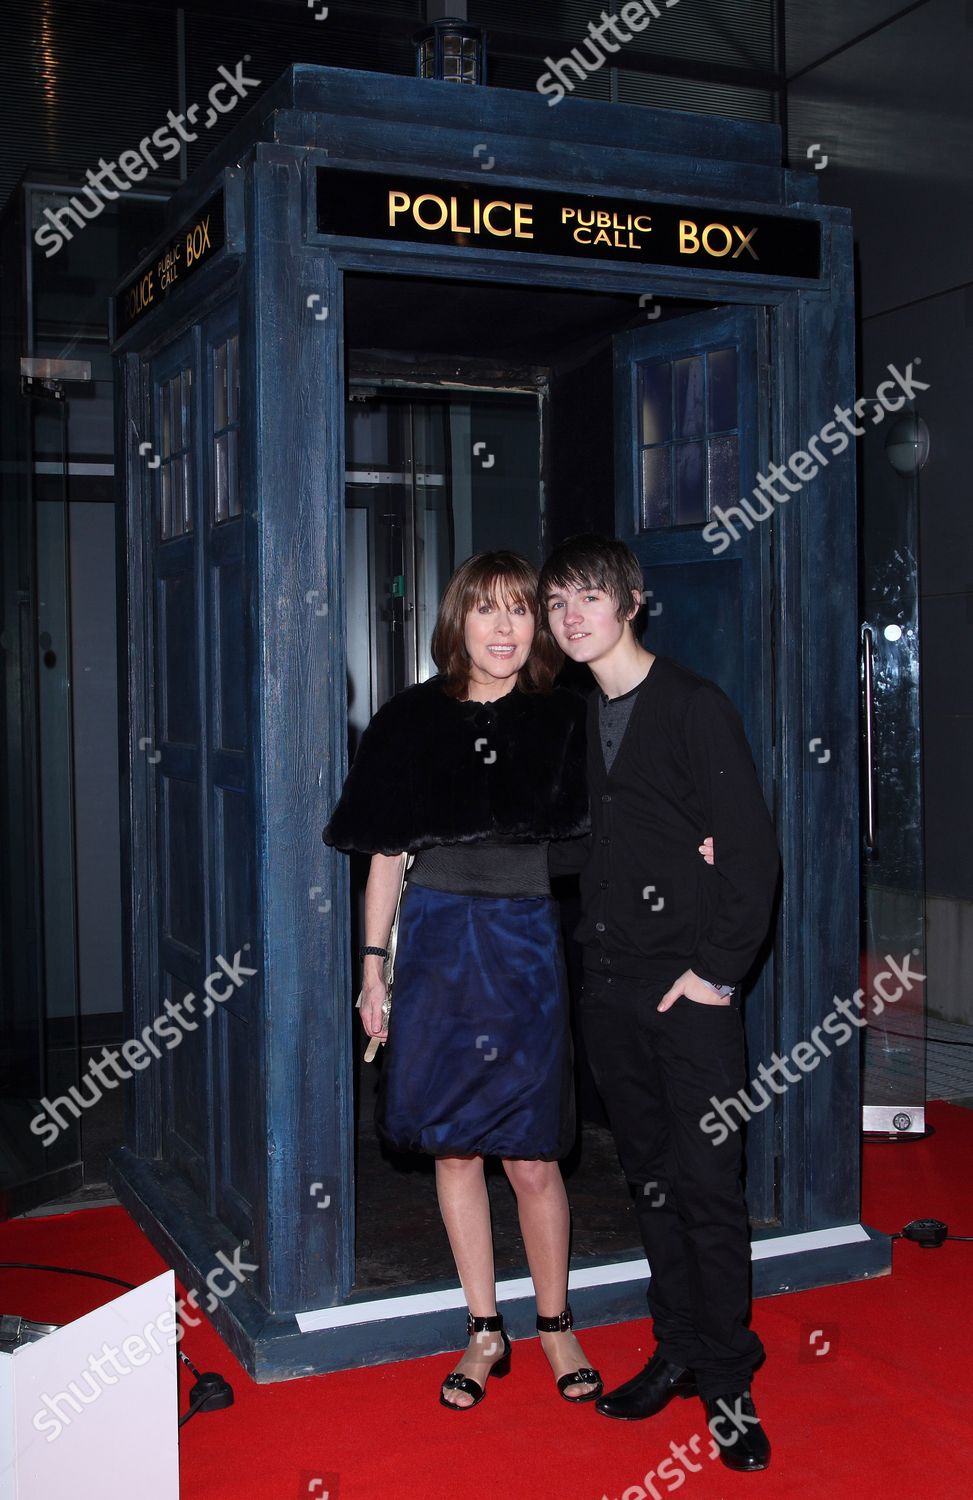 doctor-who-christmas-episode-voyage-of-the-damned-gala-screening-london-britain-shutterstock-editorial-720828c.jpg